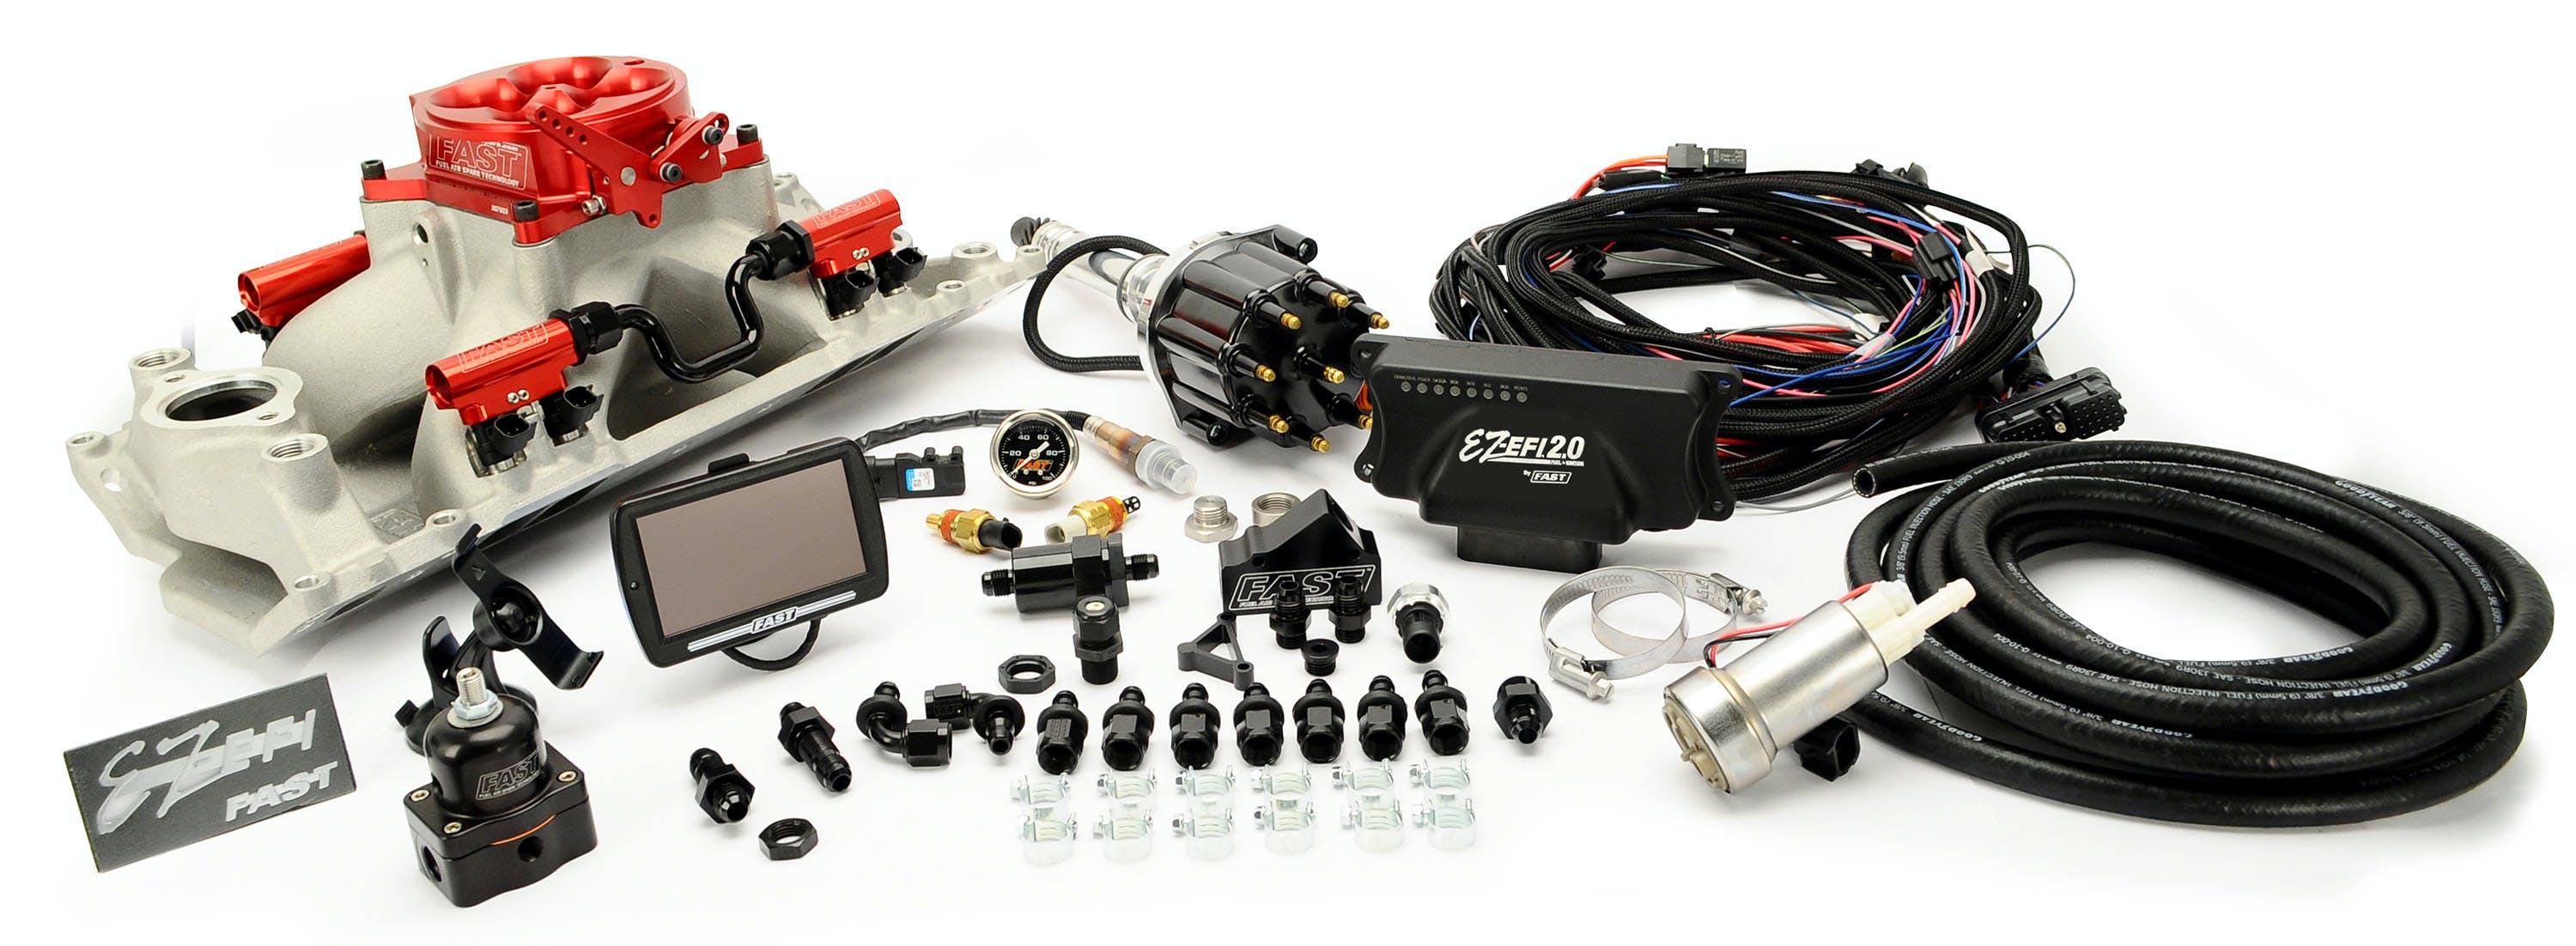 FAST - Fuel Air Spark Technology 30431-10T EZ 2.0 SBF Multiport w/intake, rails, throttle body, distributor and fuel pump